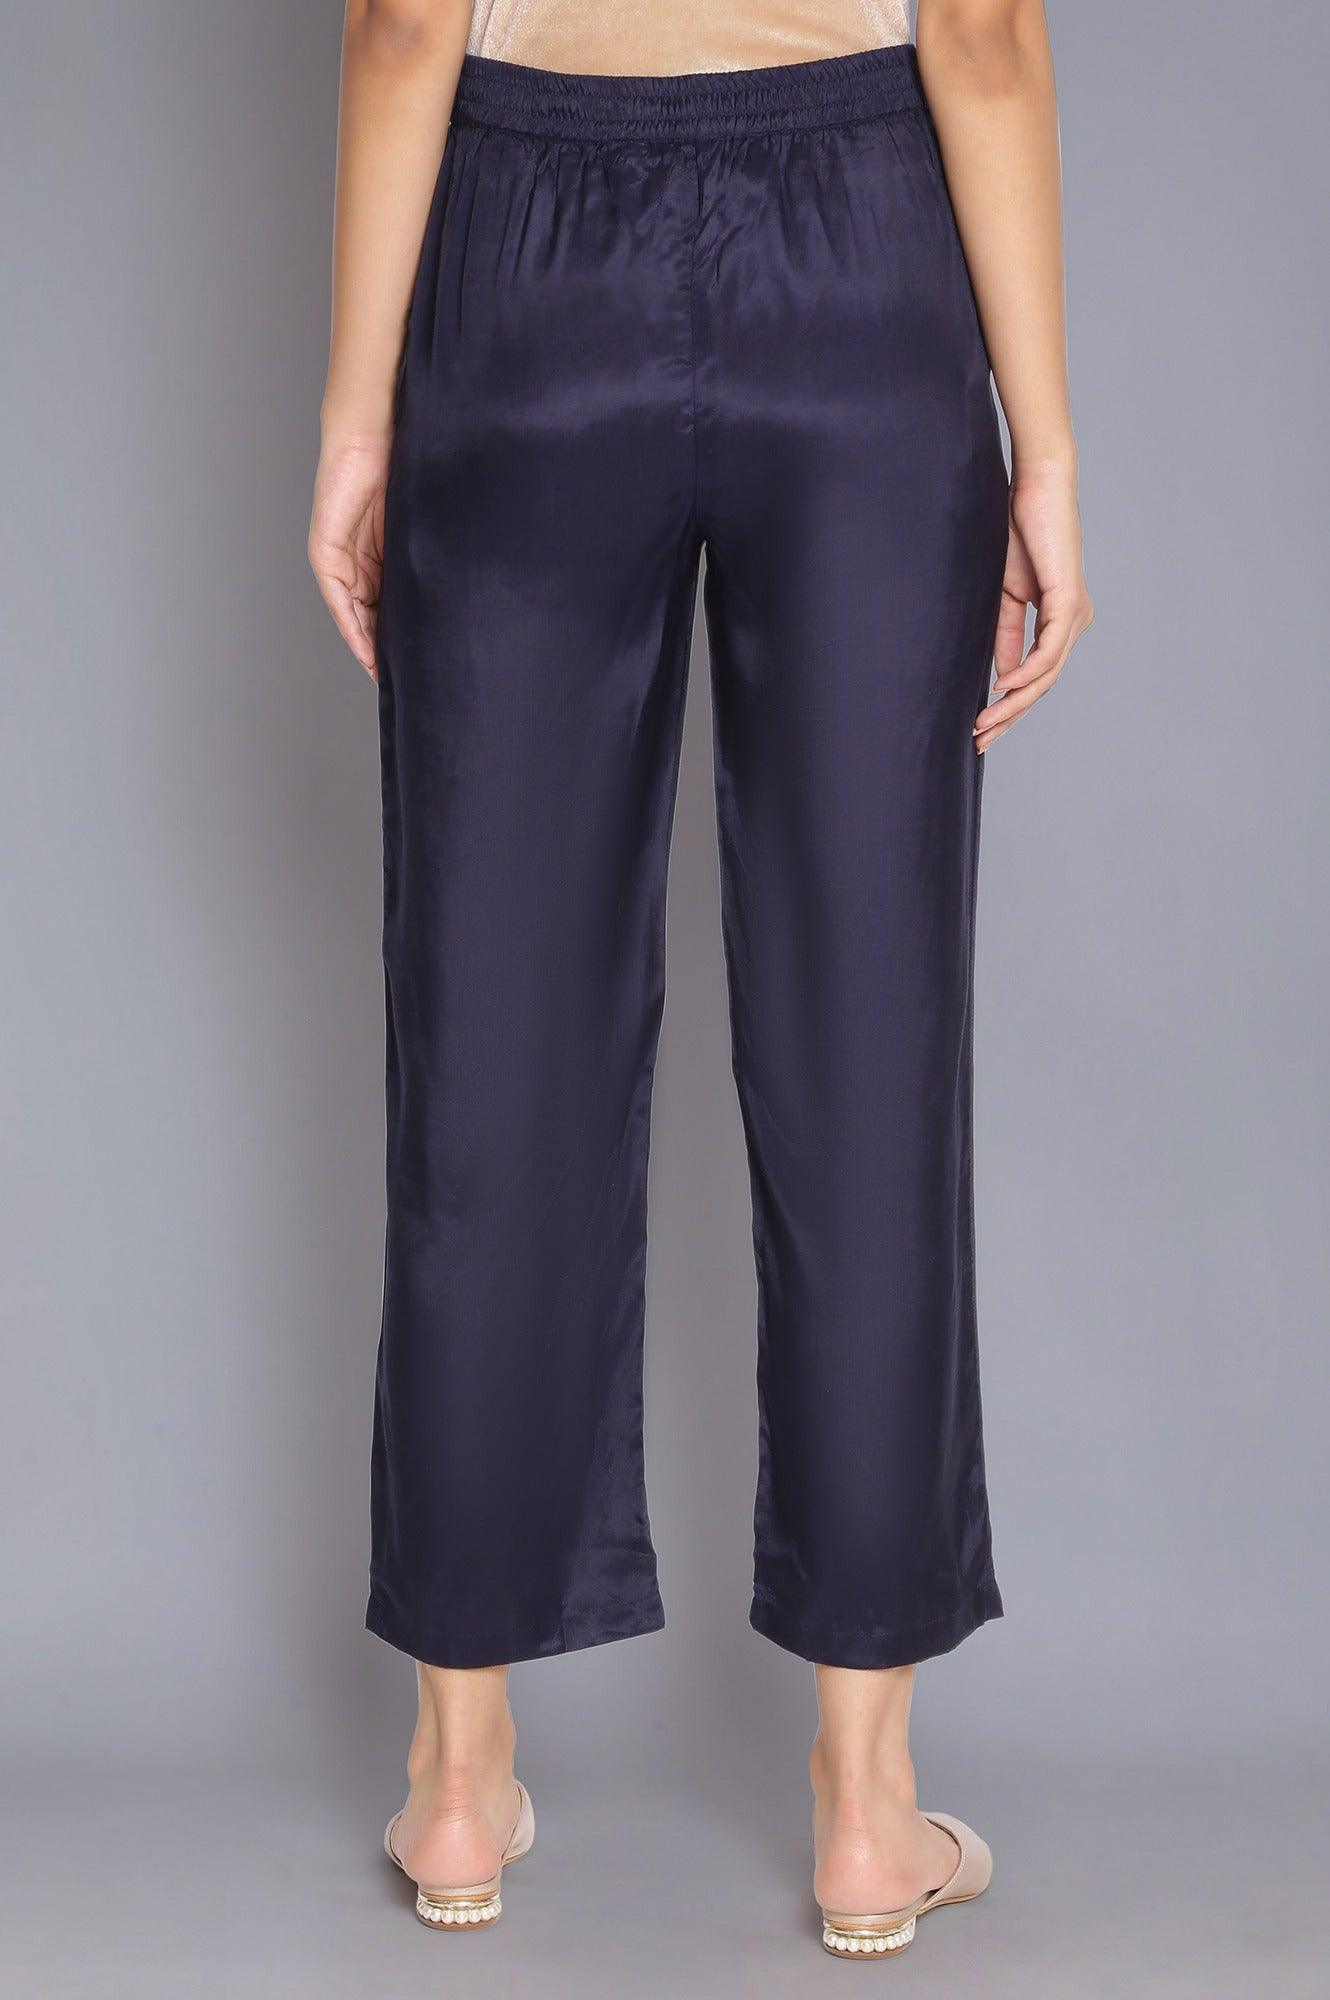 Navy Blue Solid Straight Pants - wforwoman